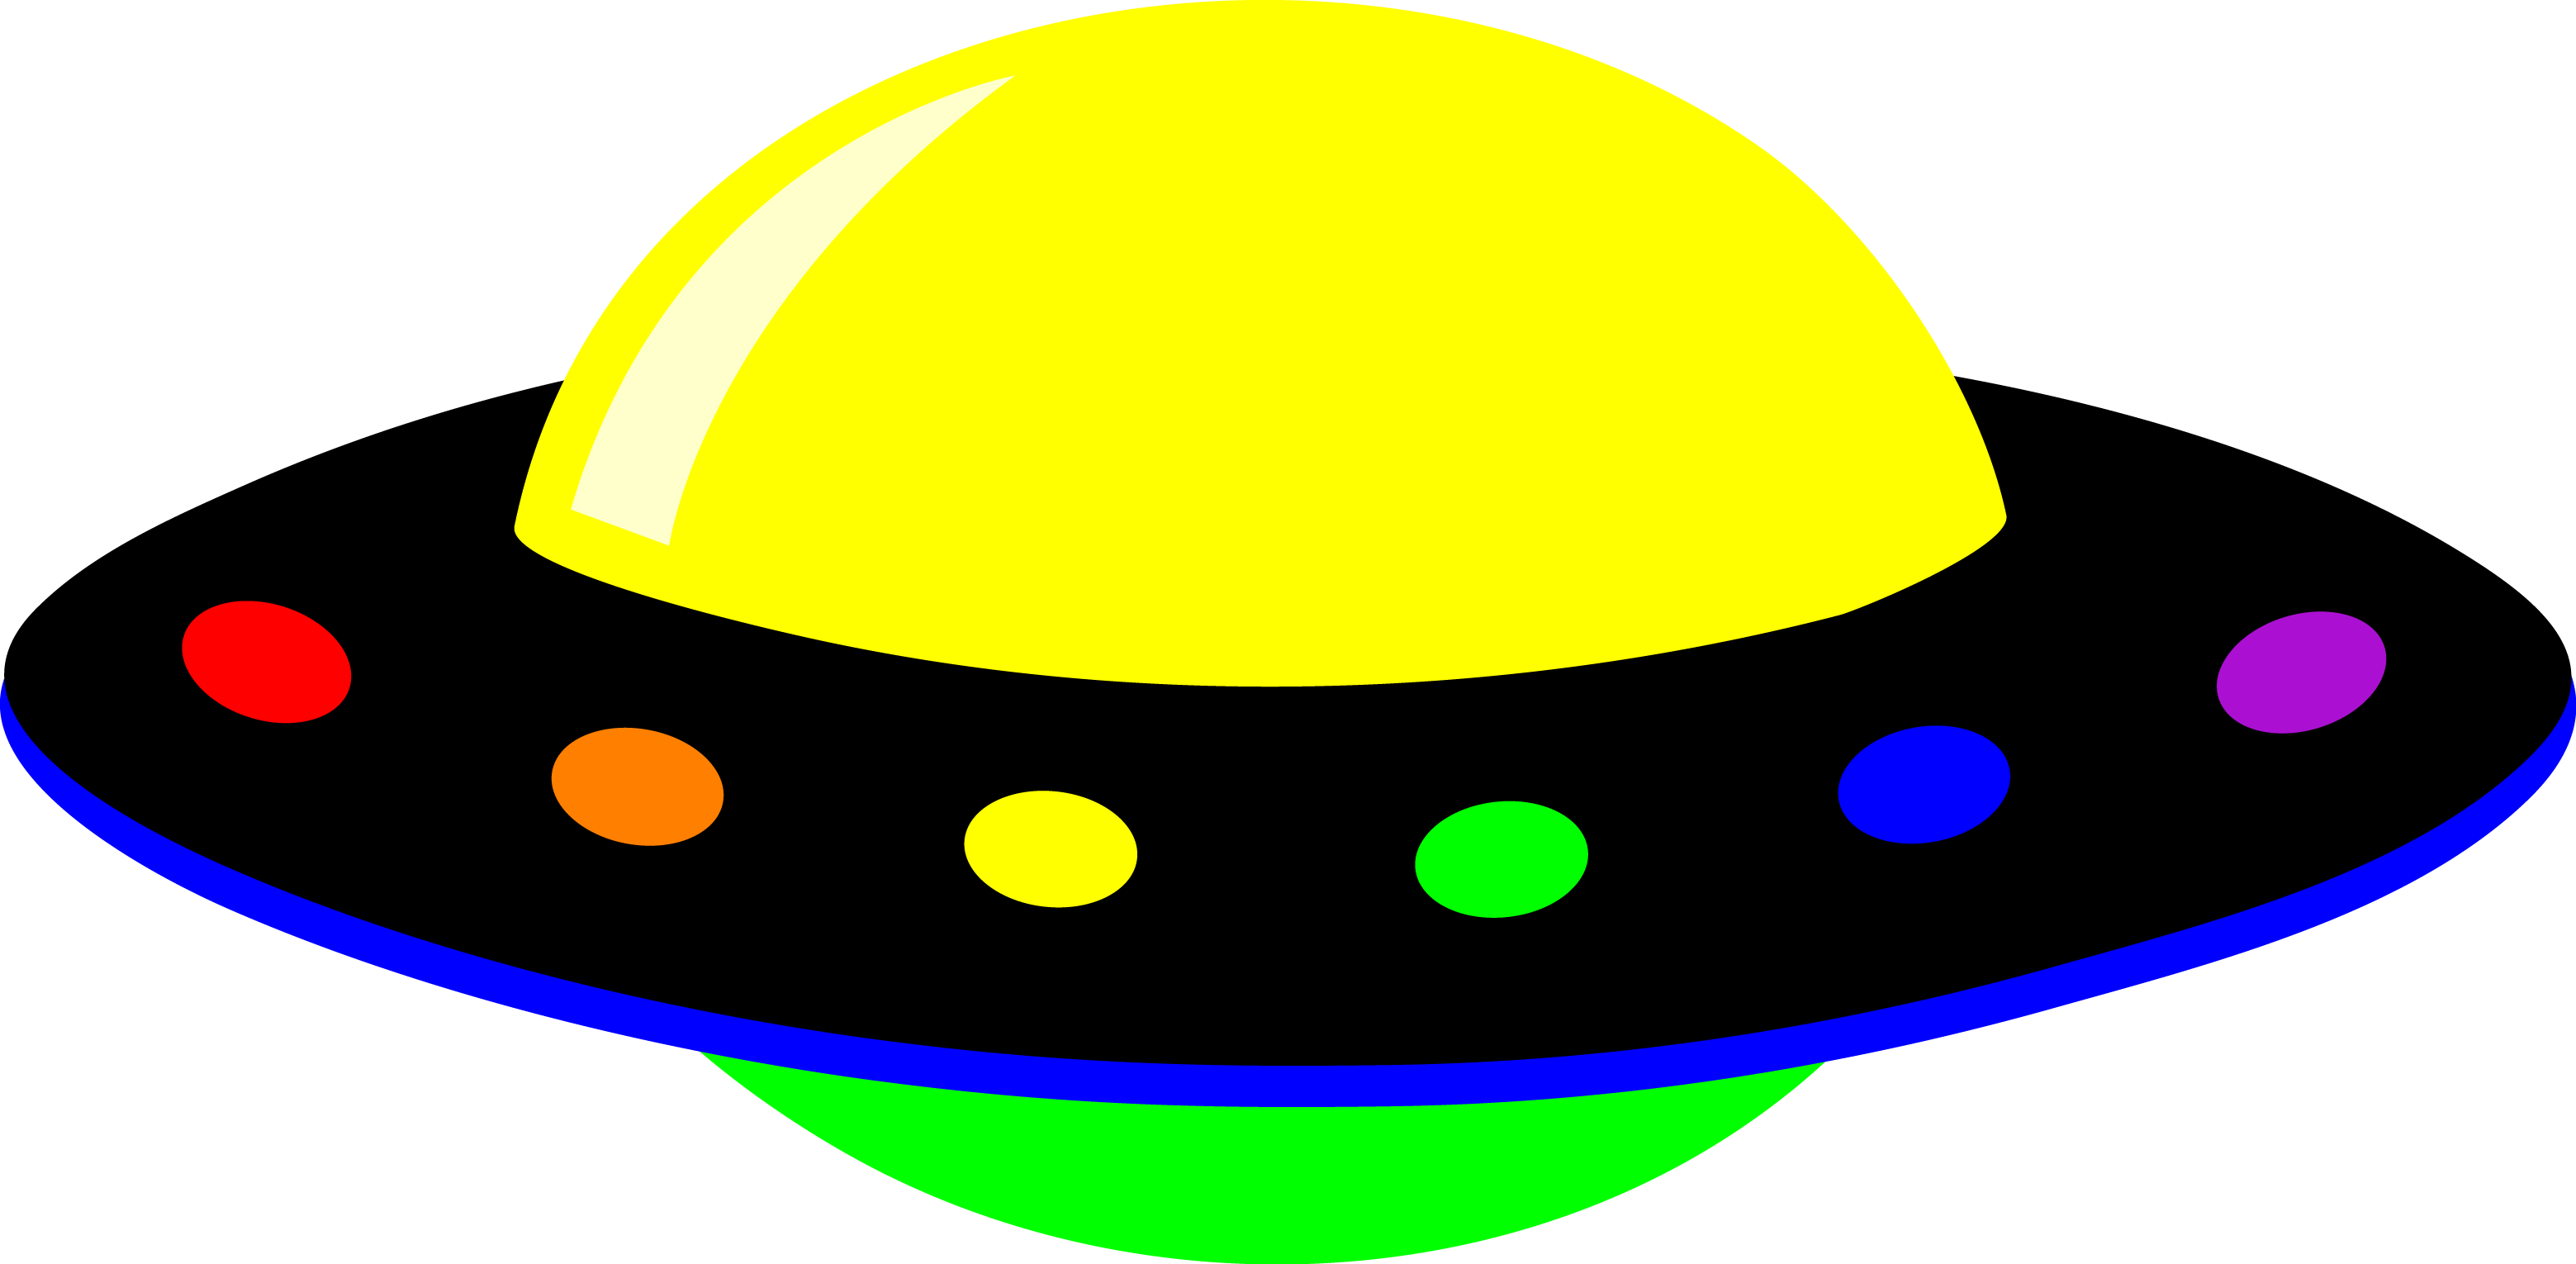 Free Alien Spaceship Cliparts, Download Free Alien Spaceship Cliparts